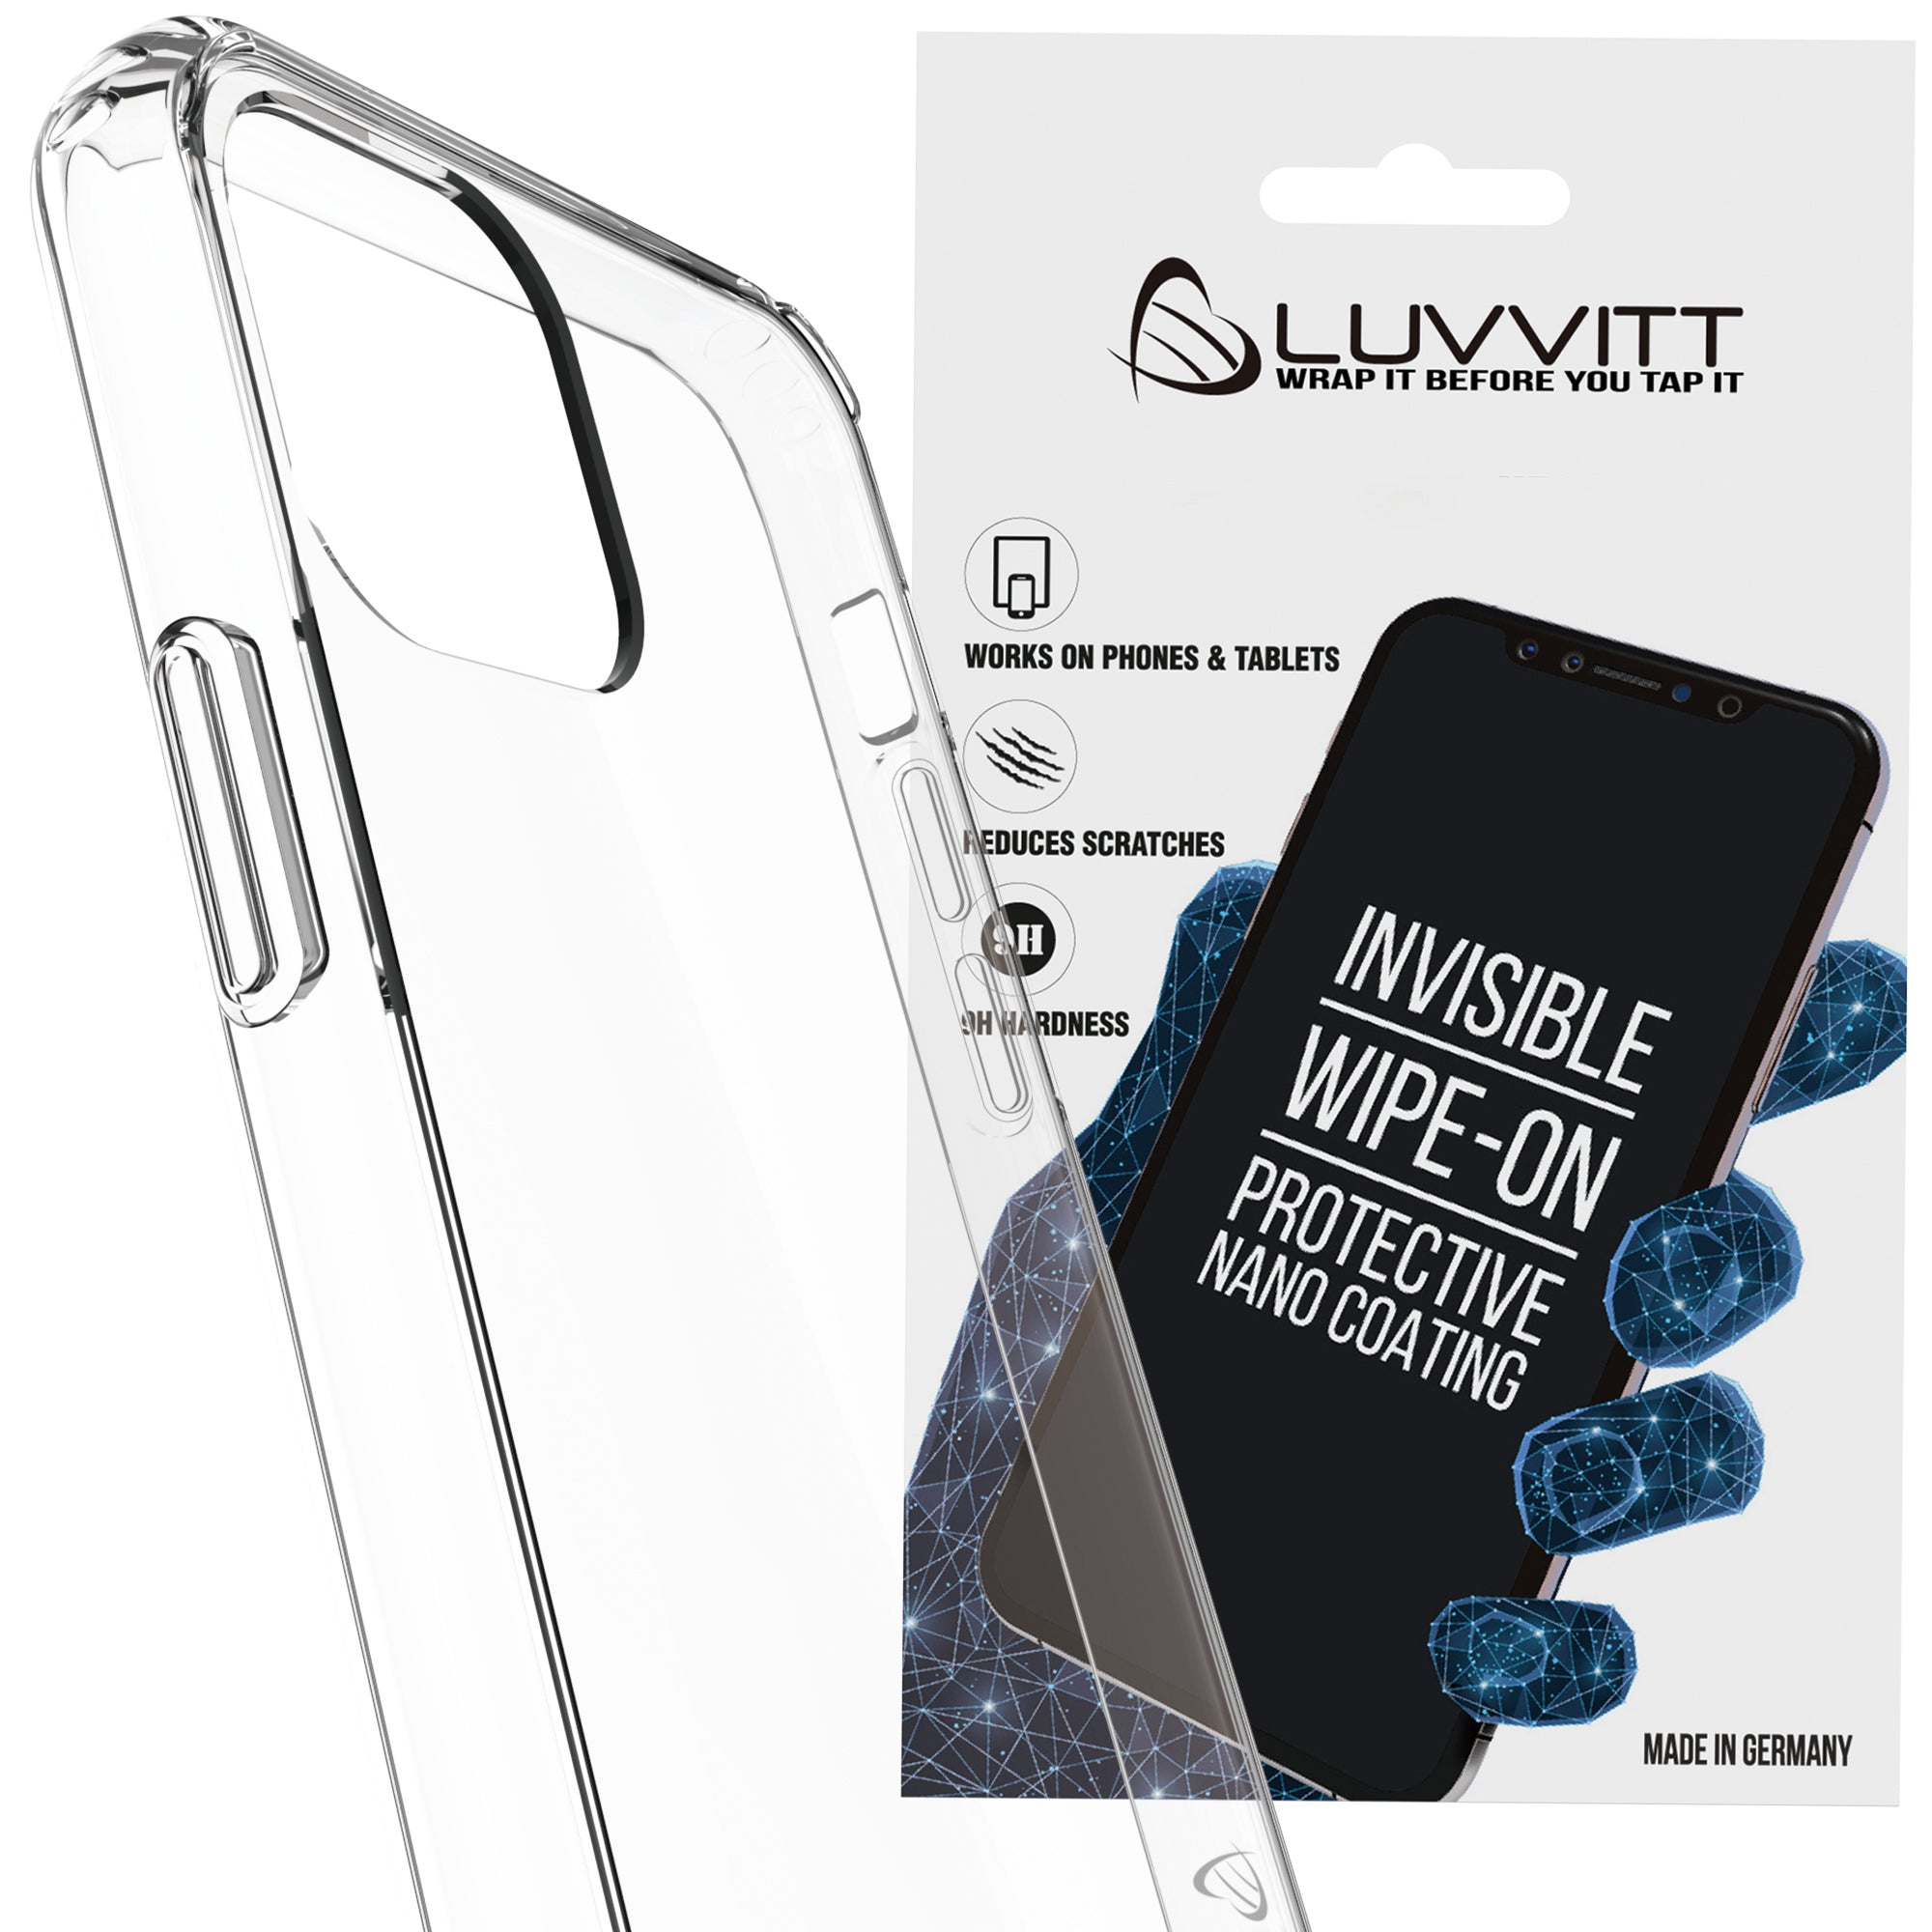 Luvvitt $250 Warranty CLEAR VIEW Case + Liquid Glass Screen Protector Bundle for iPhone 11 Pro Max 2019